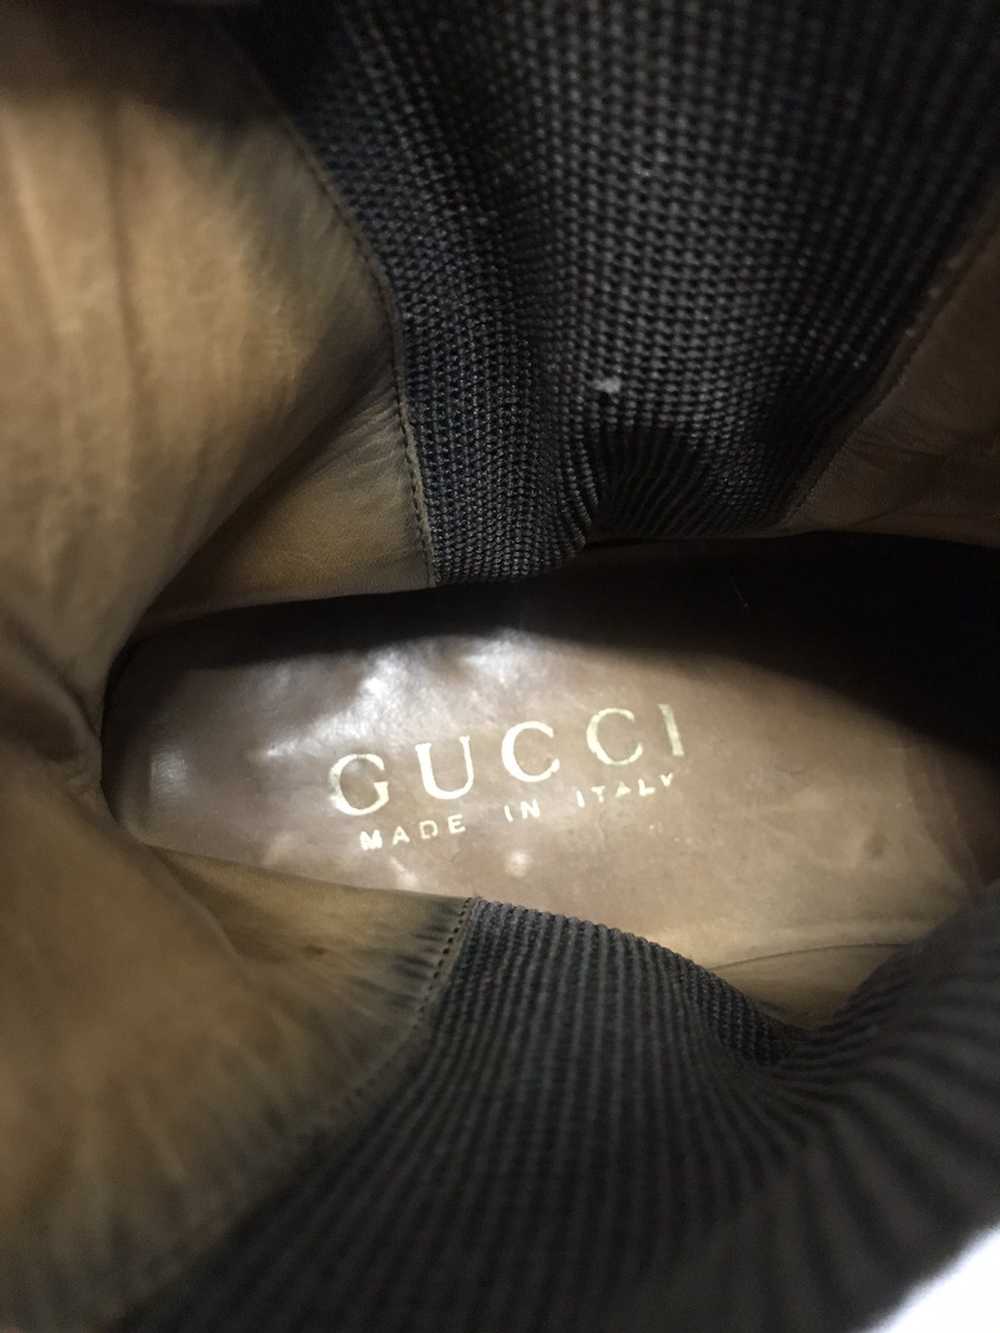 Gucci Gucci shoe suede leather - image 12